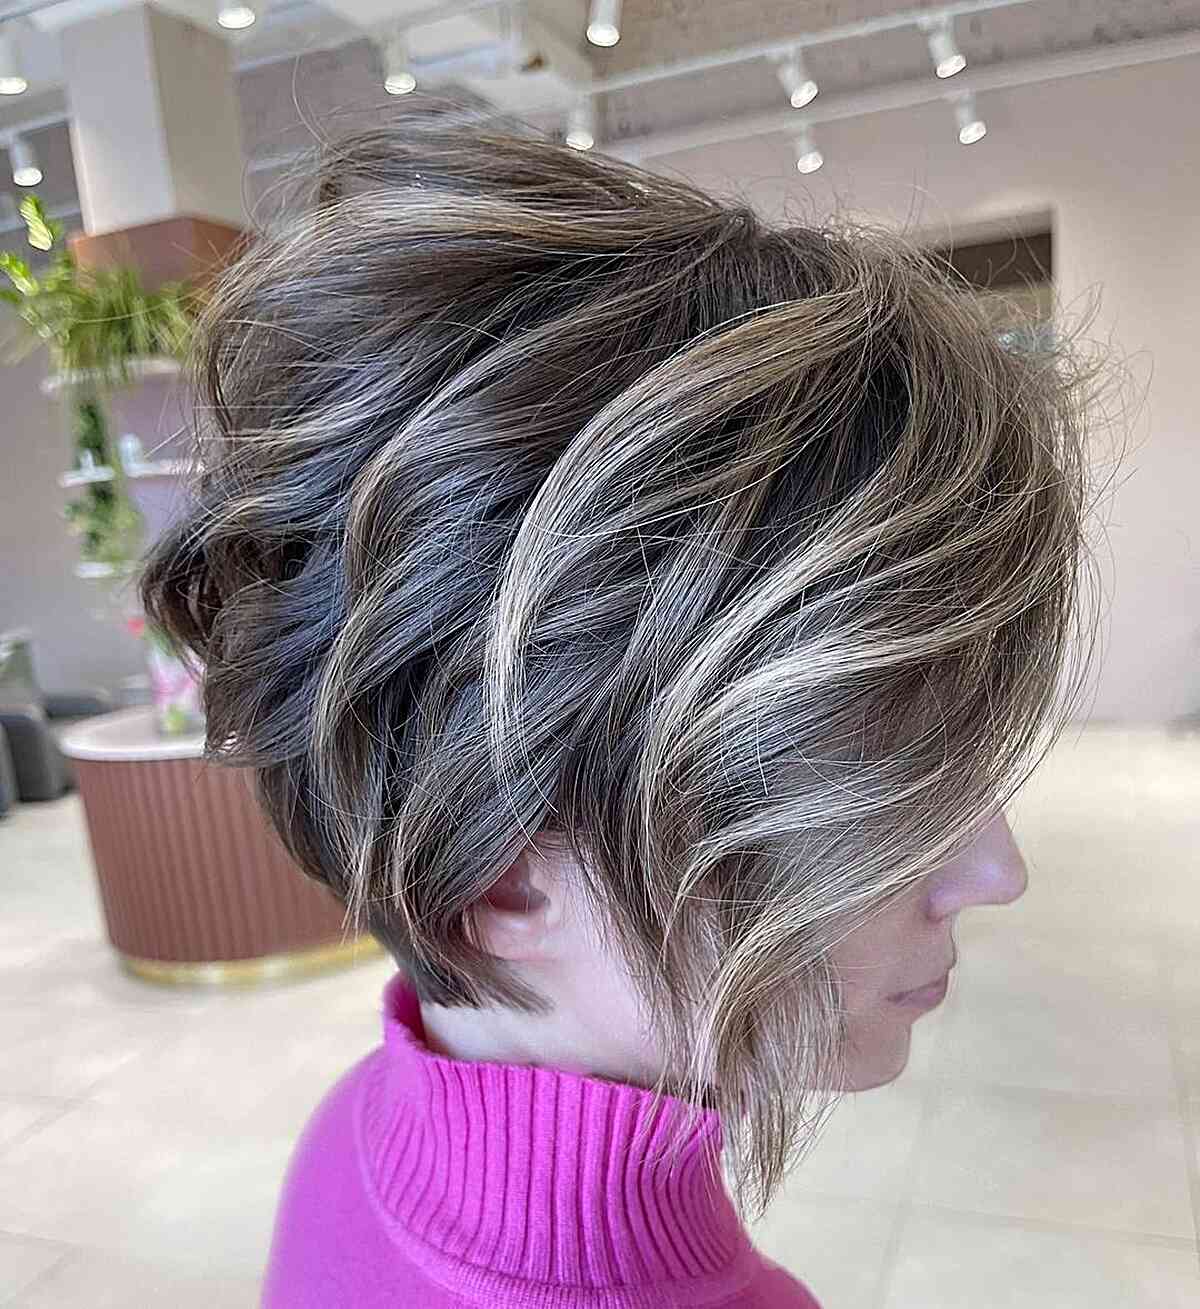 Dark Hair with Blonde Highlights and Lots of Layers for women with short hair